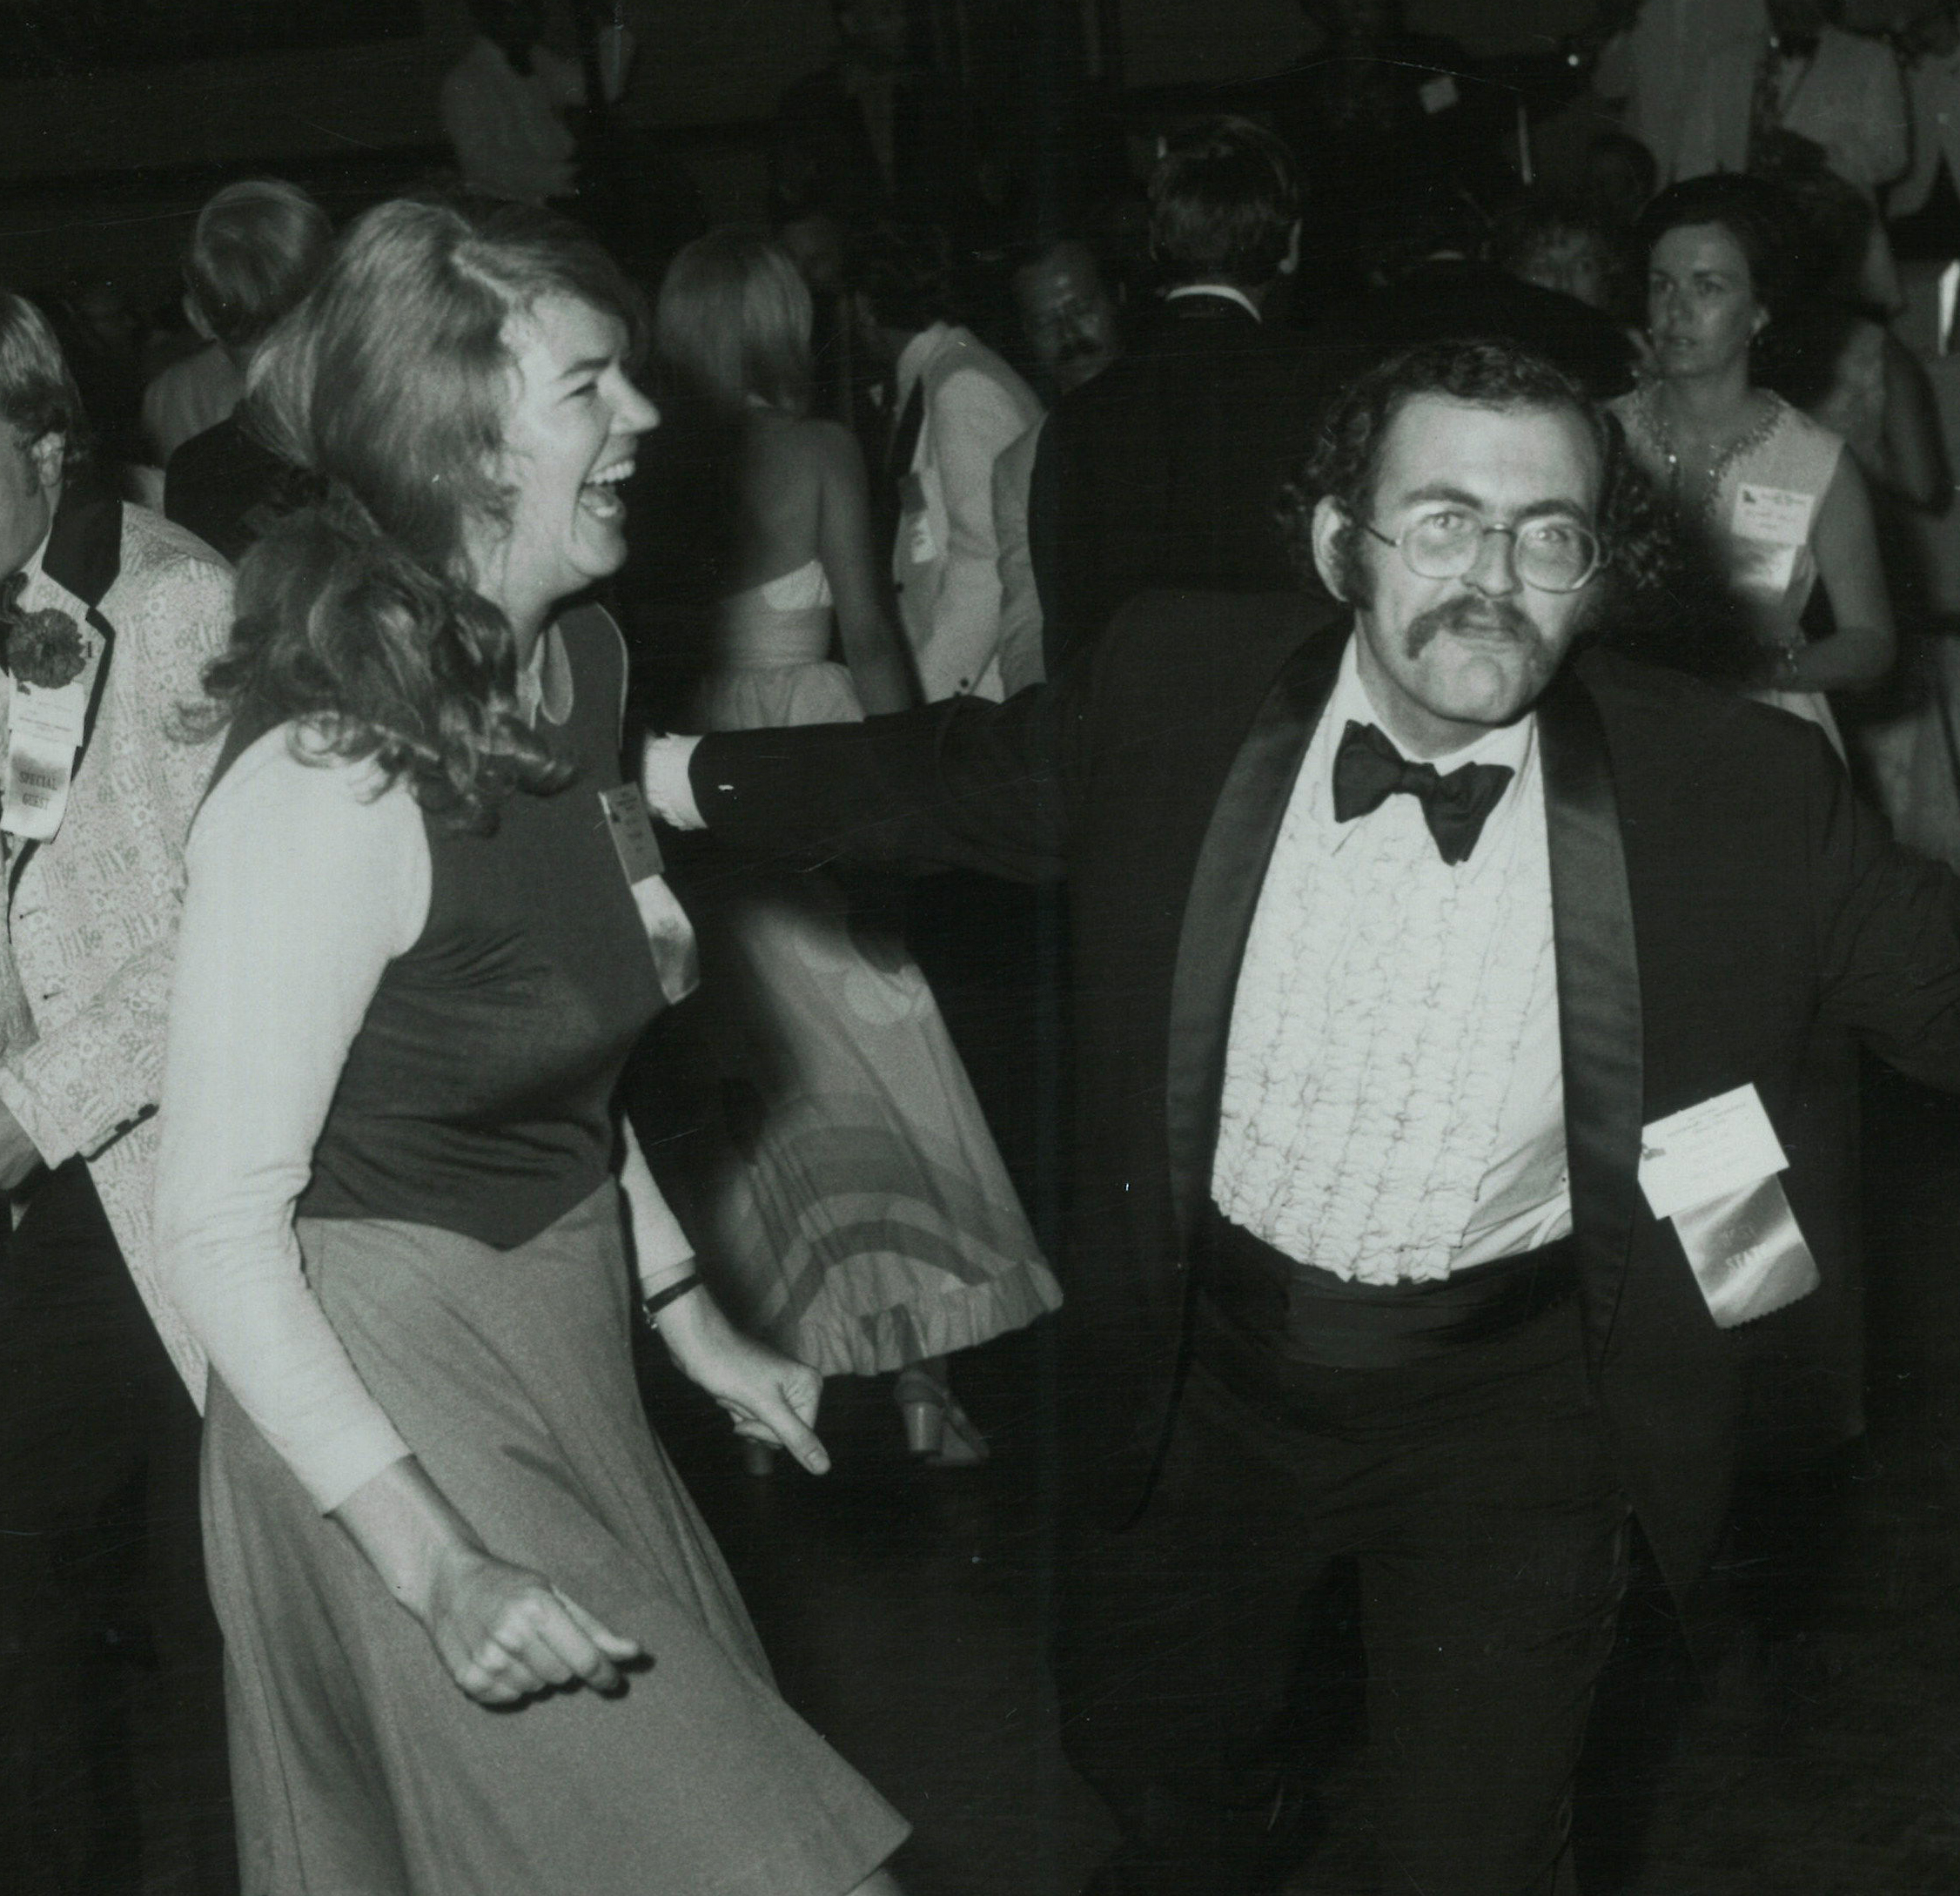 In a black and white photo, Molly Ivins, wearing a skirt and sleeveless shirt over a white blouse, laughs as Carlton Carl, in a tuxedo and bow tie, gestures dramatically next to her.